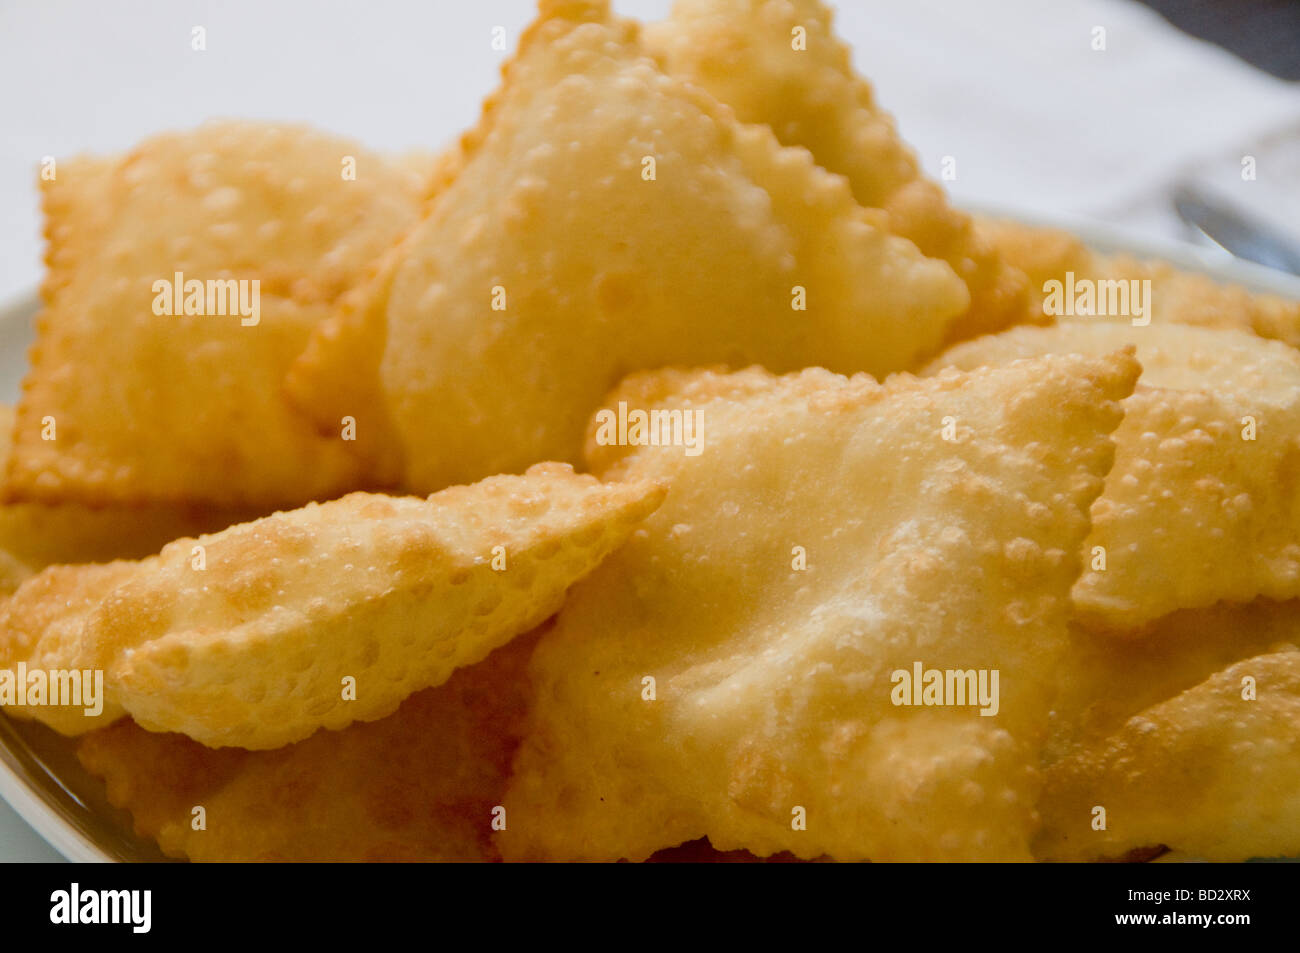 Cypriot style pastry filled with halloumi cheese Stock Photo